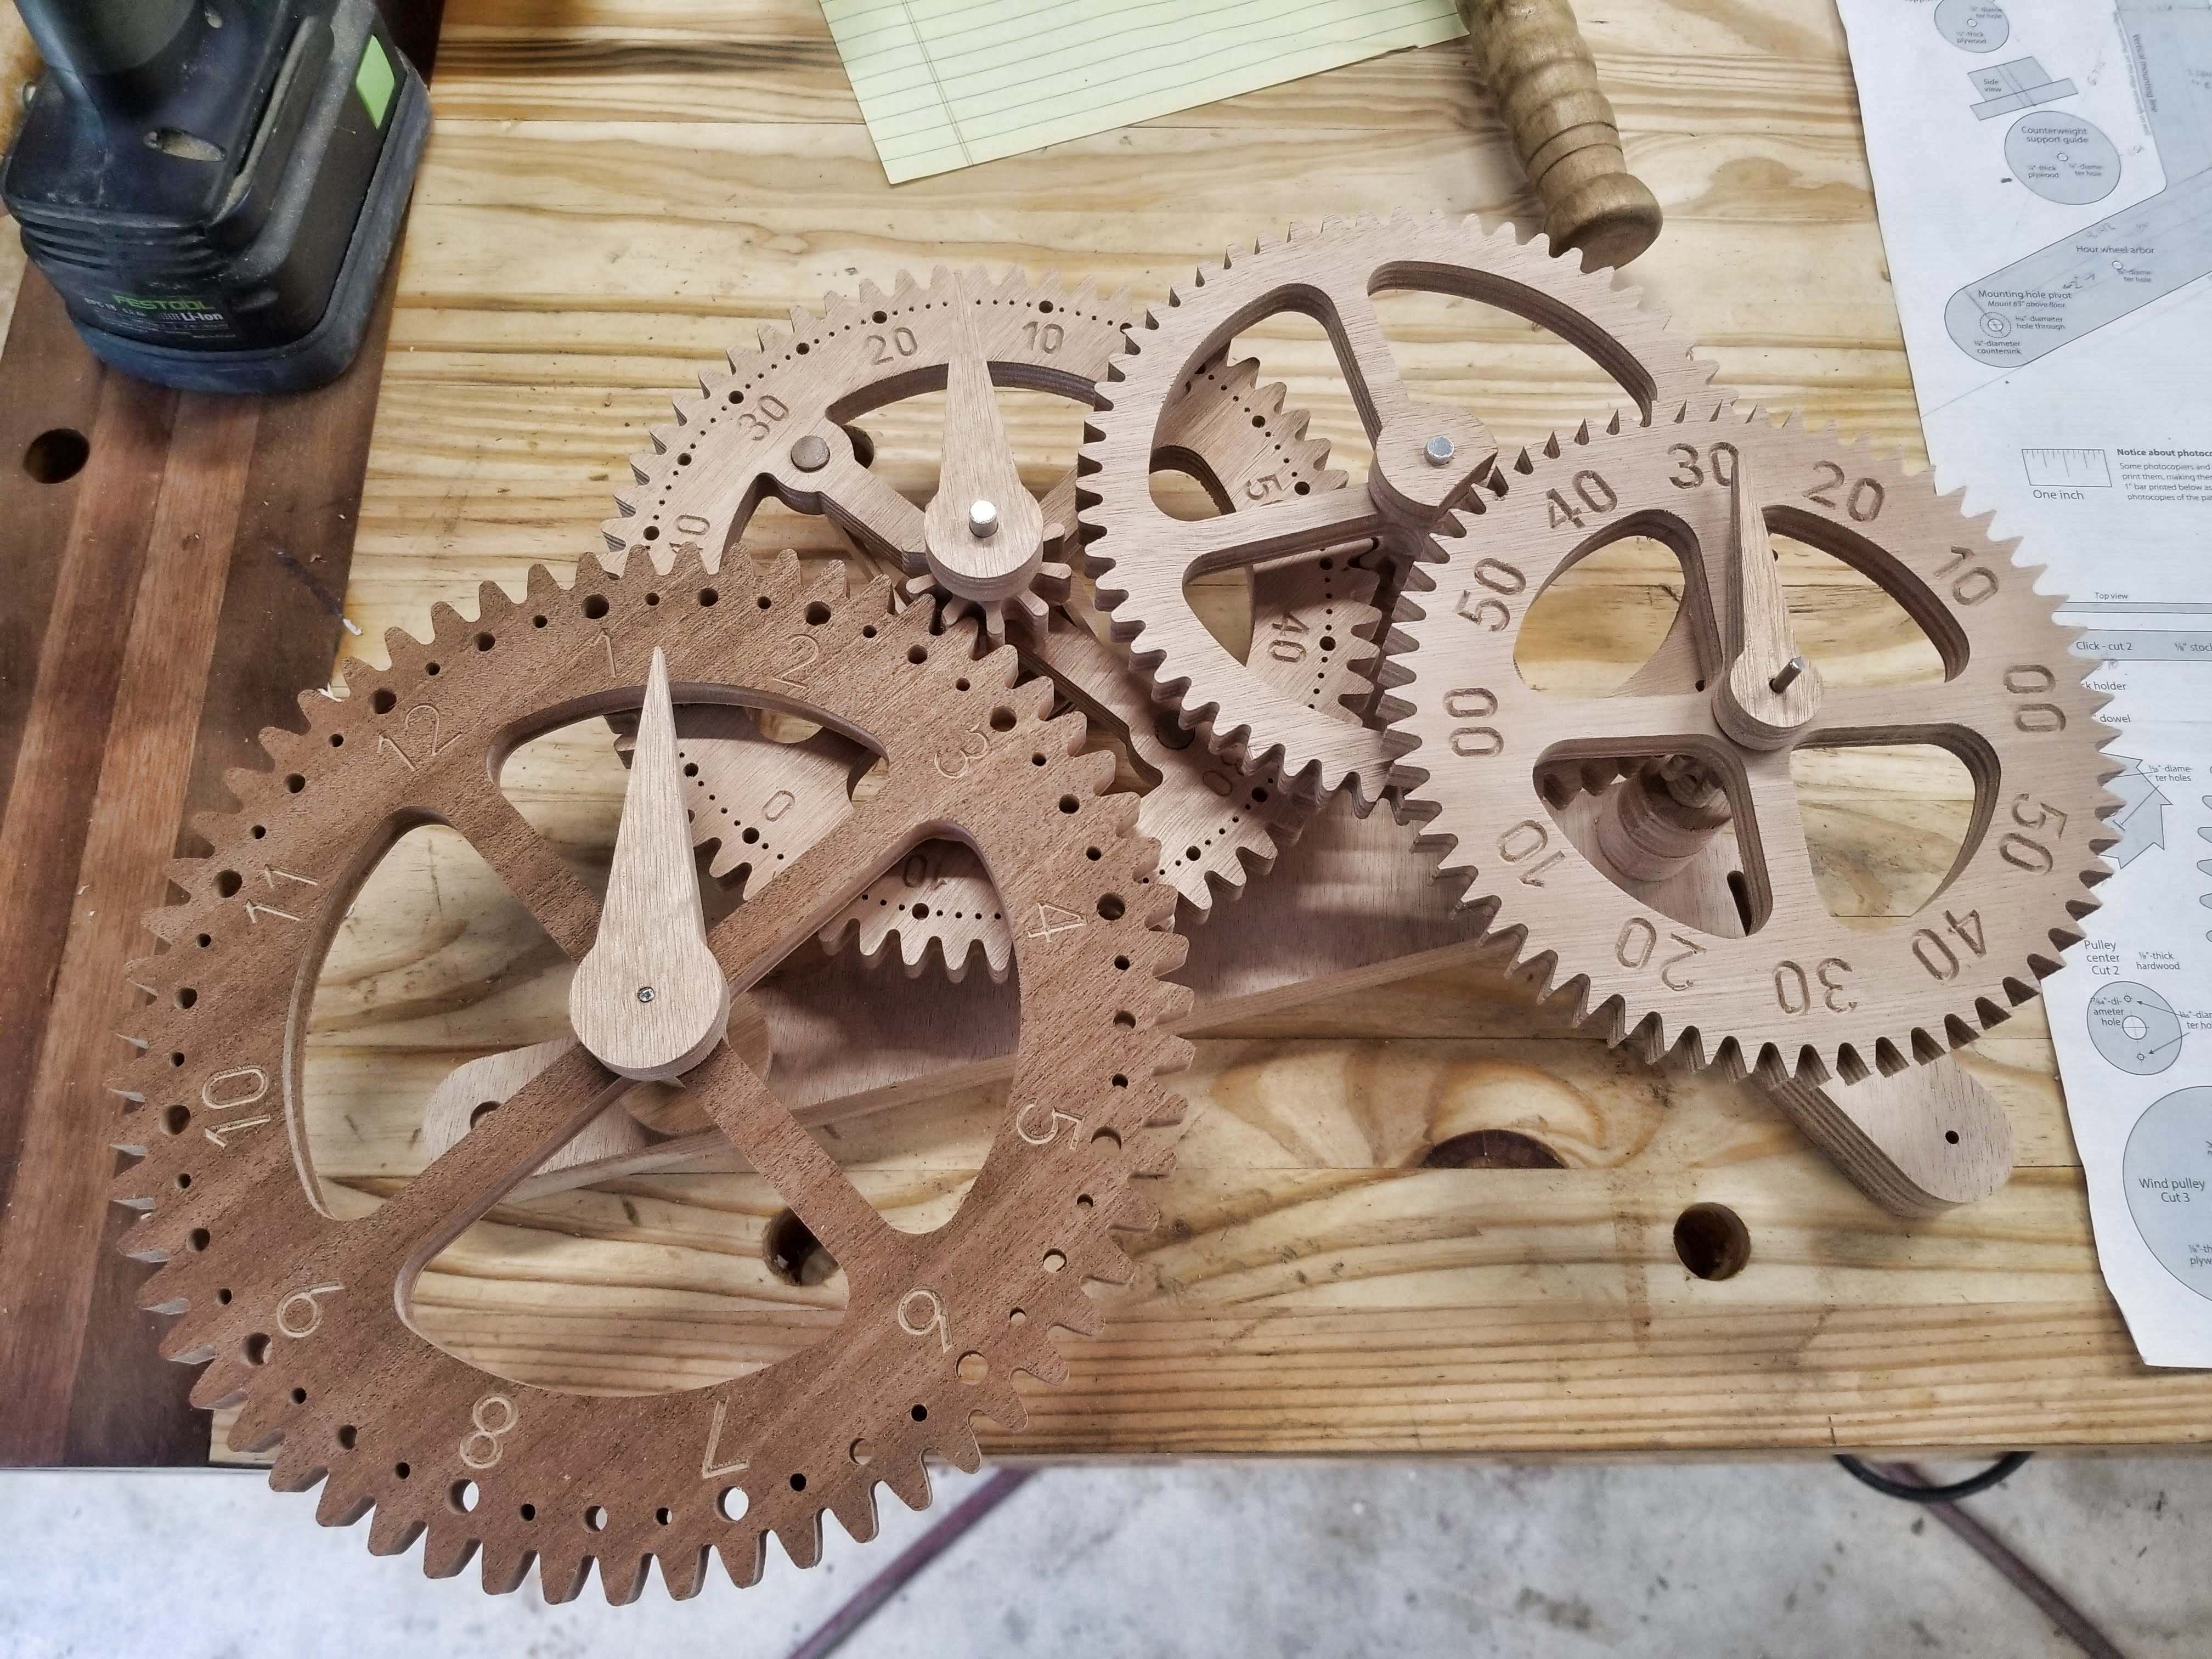 Making a Wooden Gear Clock - Part 1 - by Loxaco, Inc - With behind